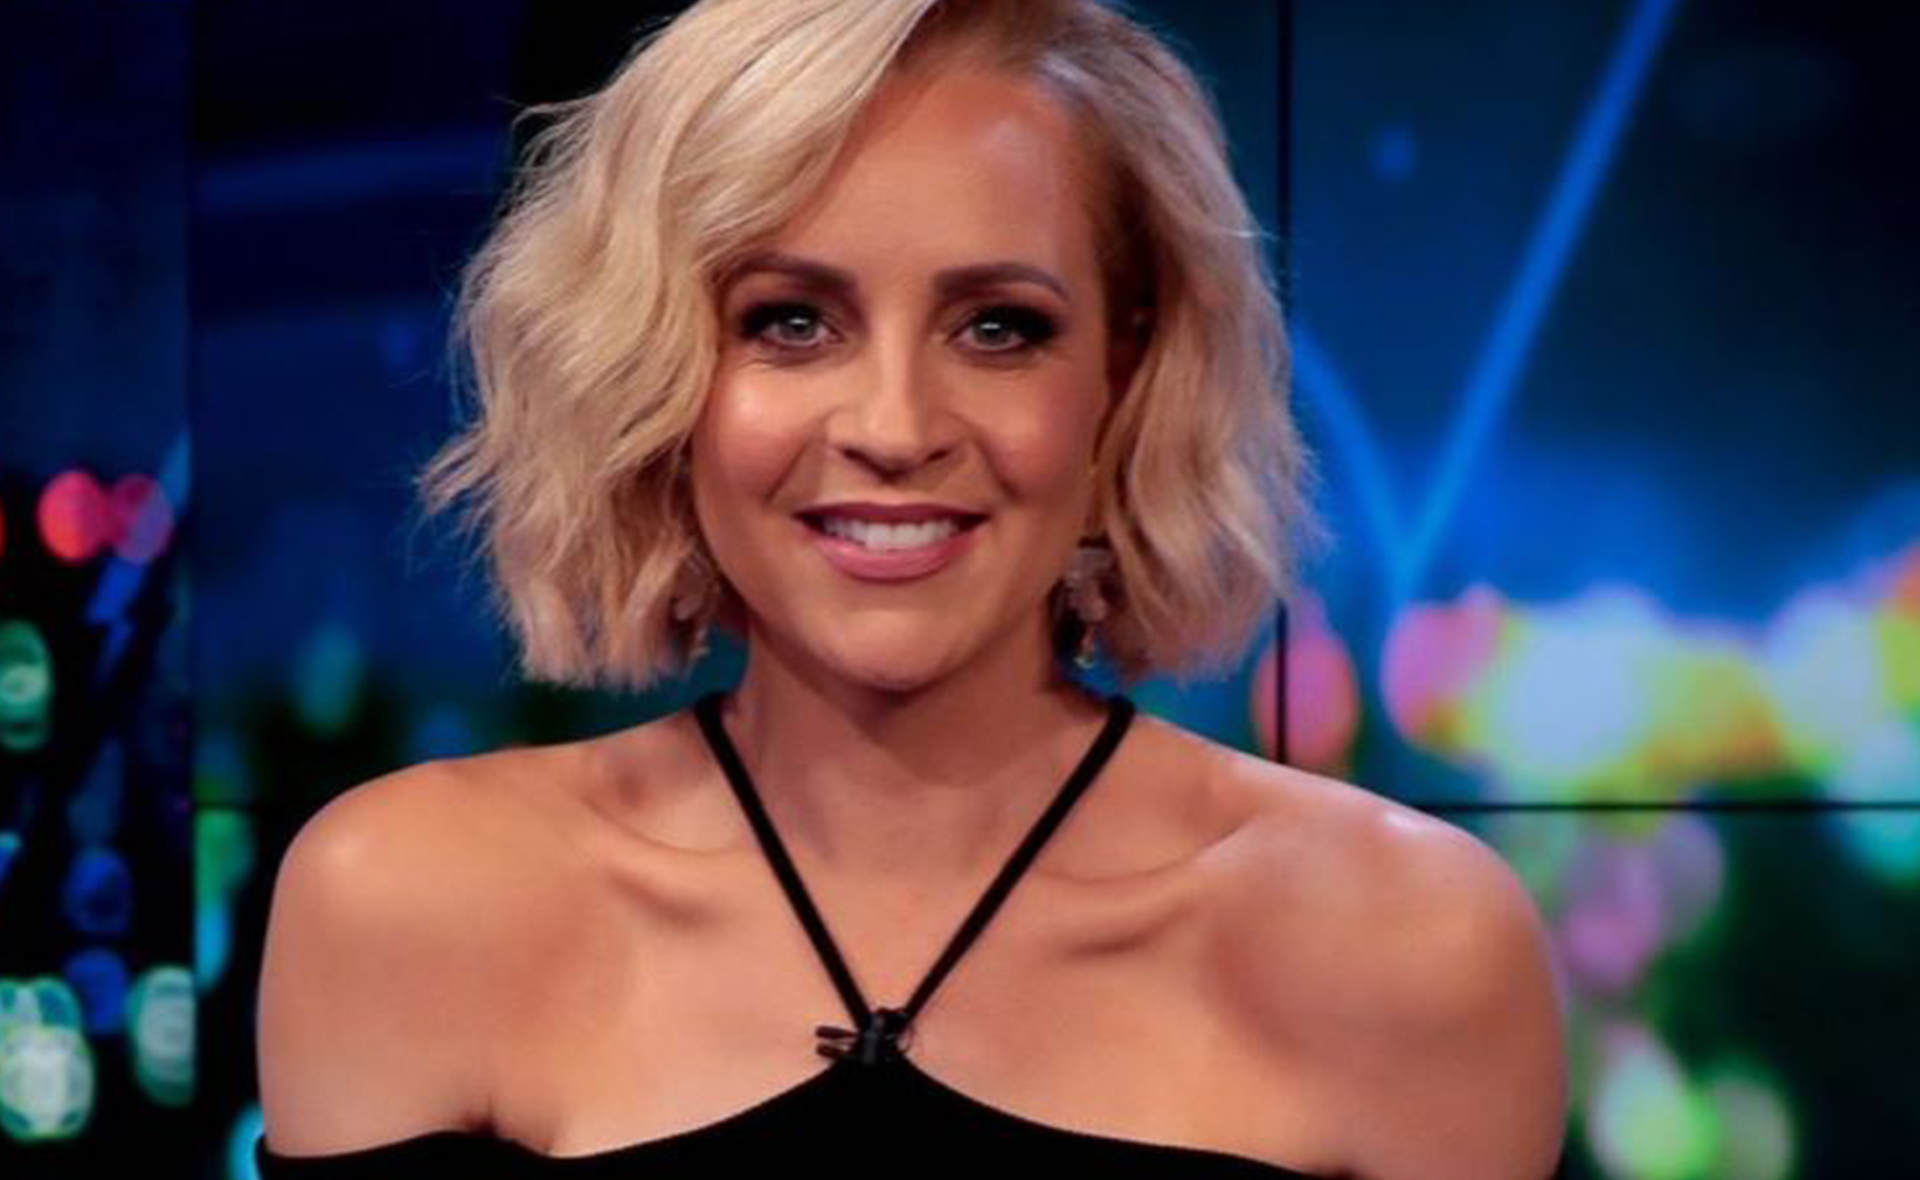 Carrie Bickmore on The Project 